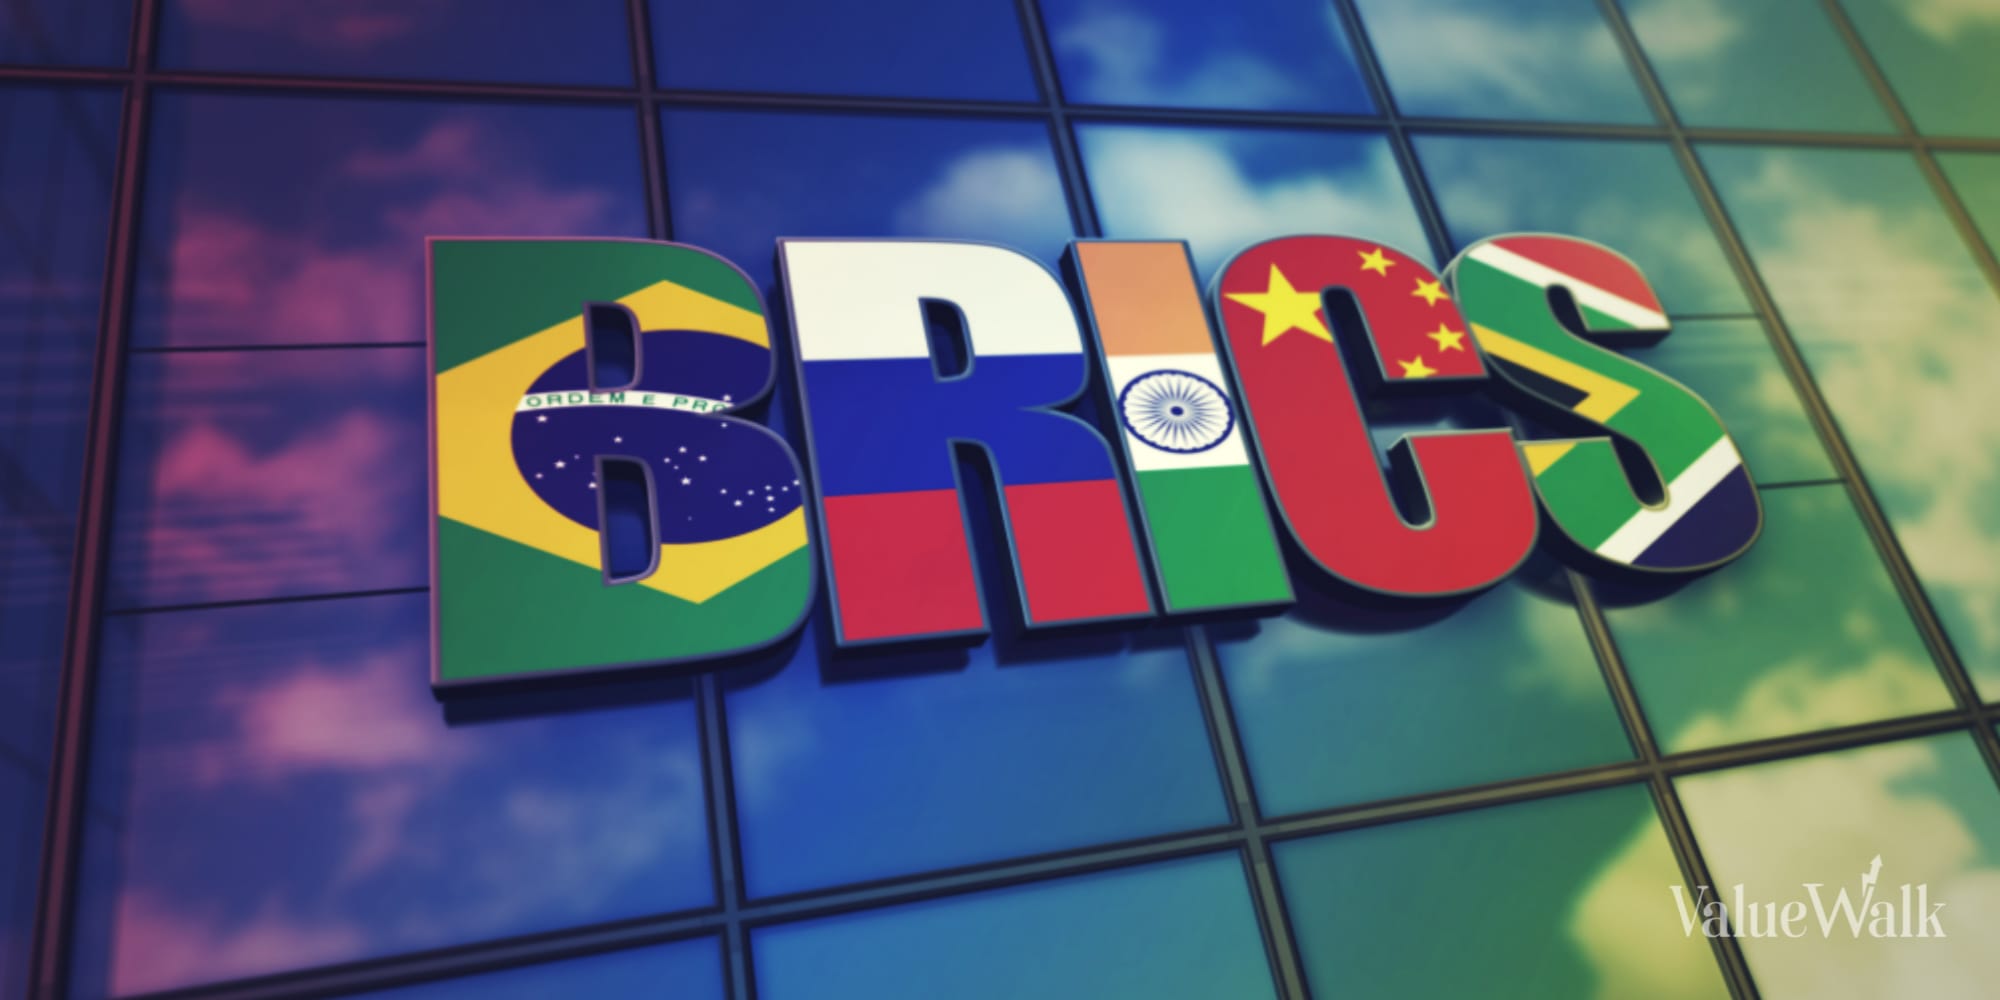 An image of the letters BRICS with country flags